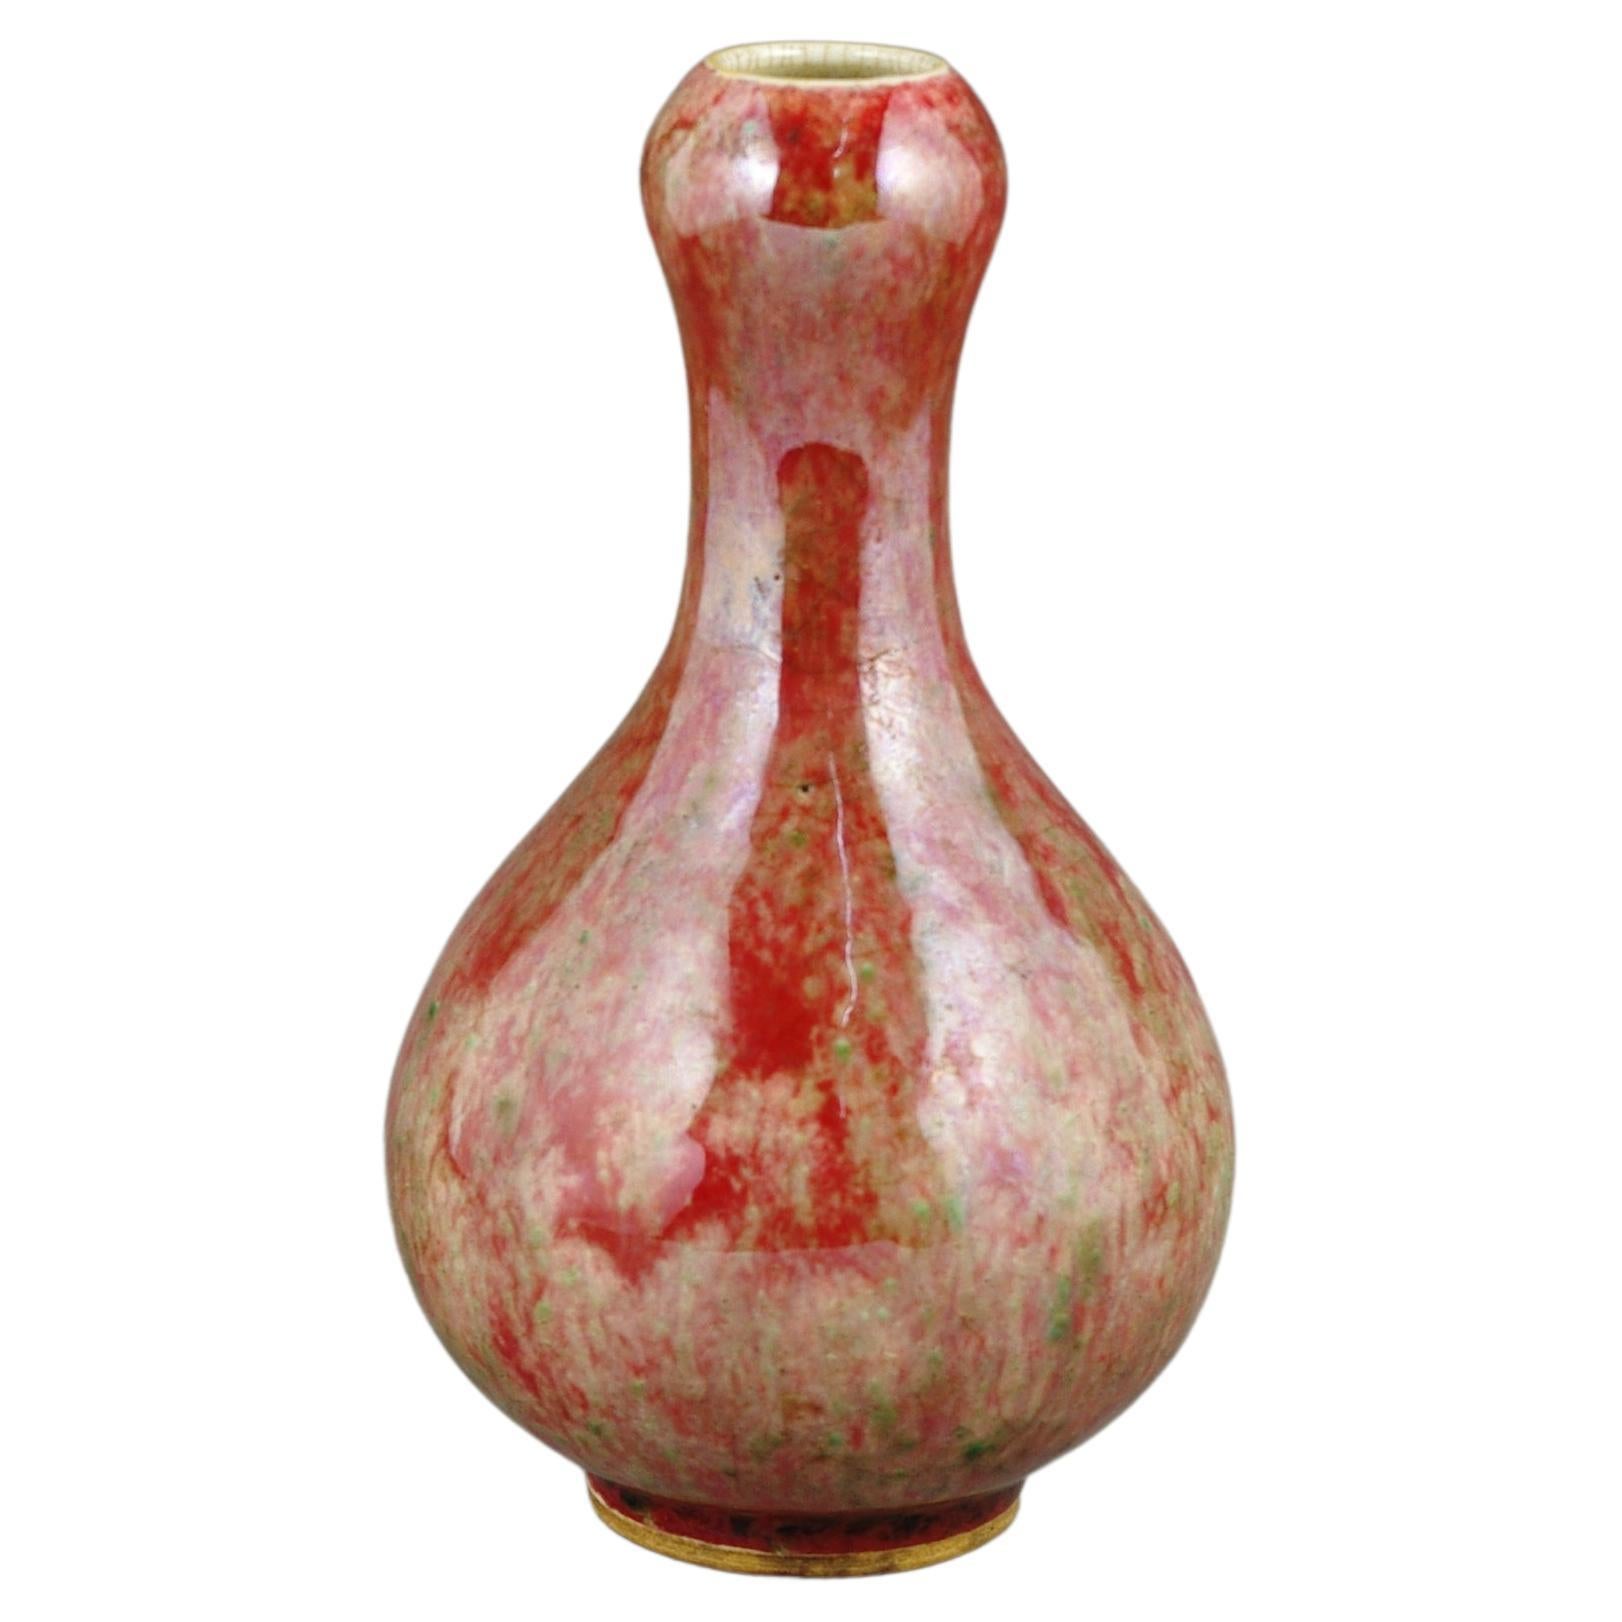 An antique early 20c peachbloom flambe garlic mouth vase. This vase is a magnificent representation of the flambe glazing technique, a process that gives it a fiery, flowing appearance, akin to the vibrant hues seen in a flame, making each piece a